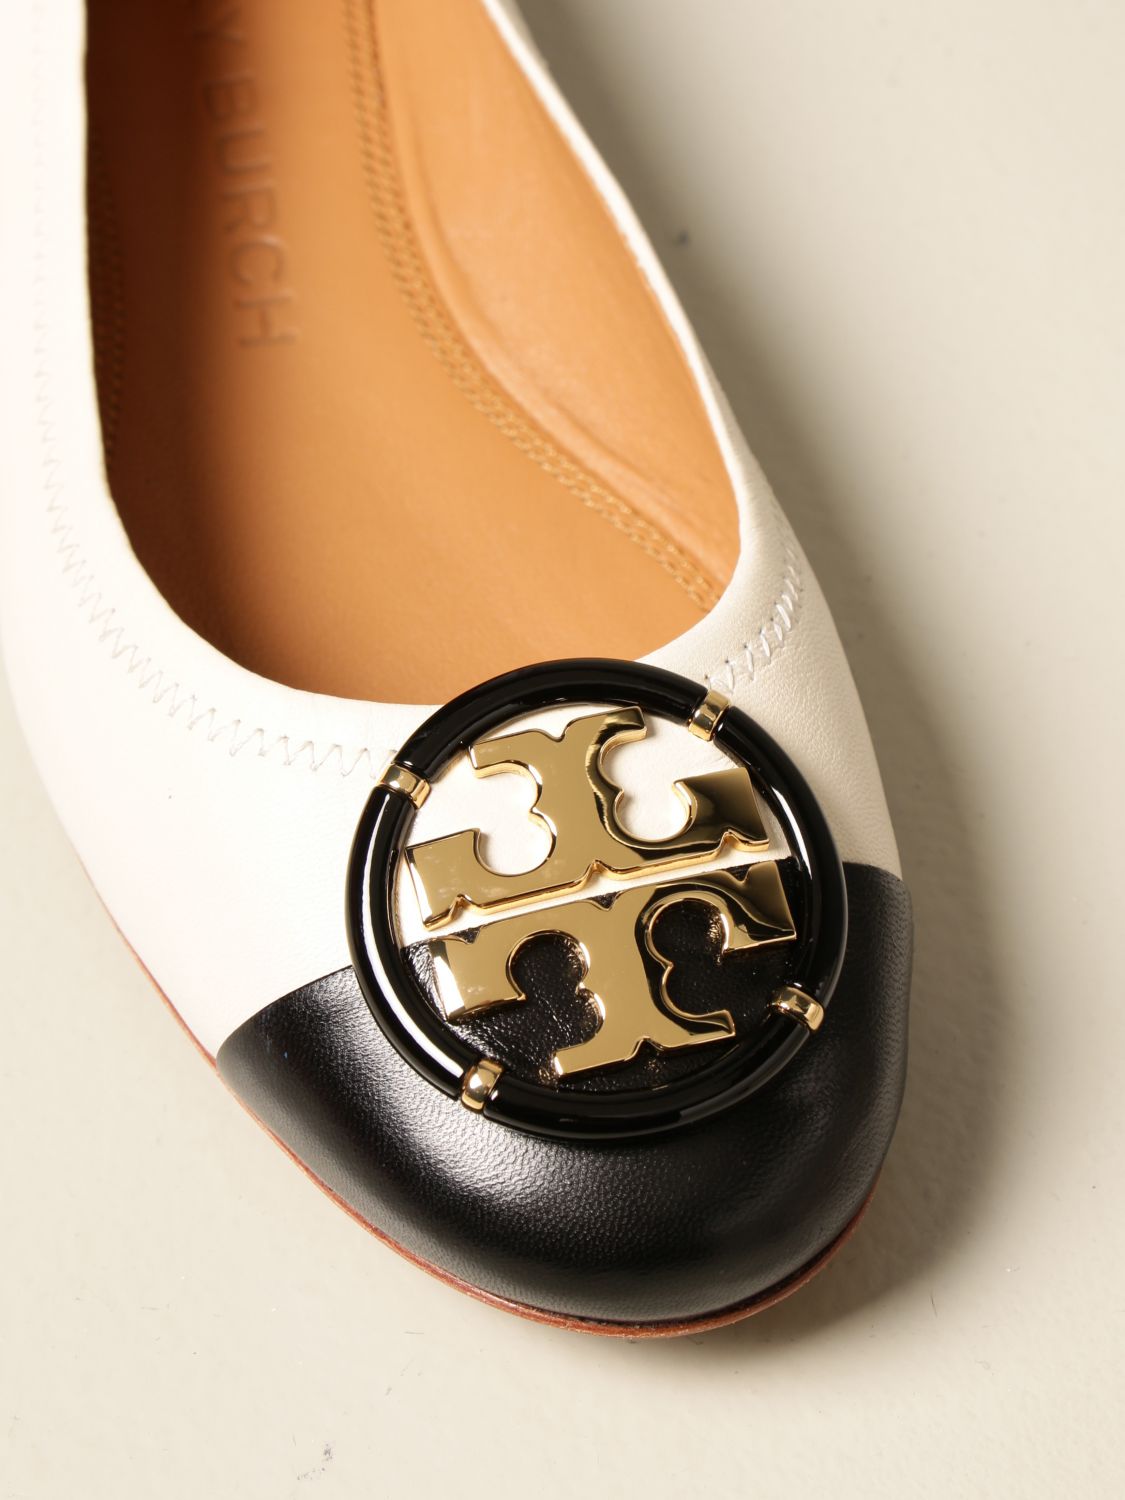 TORY ballerina in leather with logo | Ballet Flats Tory Burch Women Black | Ballet Flats Tory Burch 81724 GIGLIO.COM